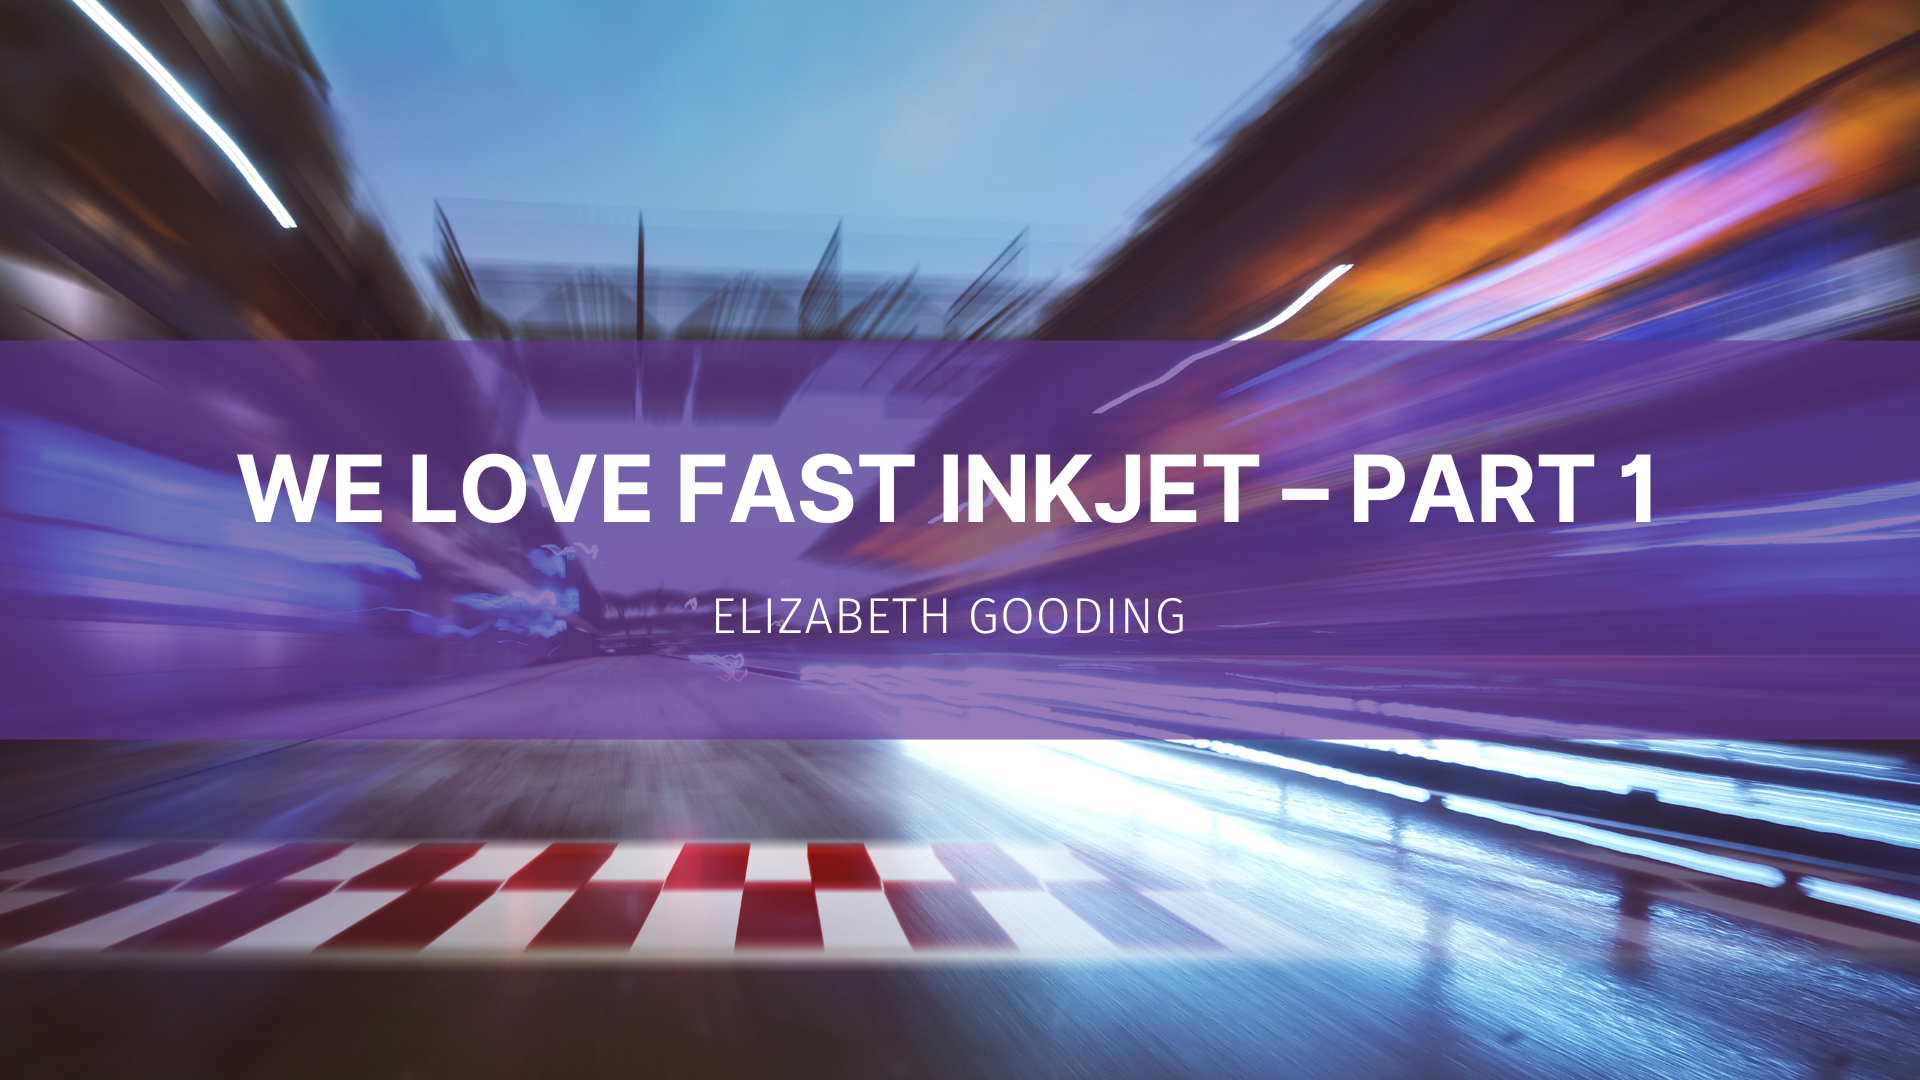 Featured image for “We love fast inkjet – part 1”